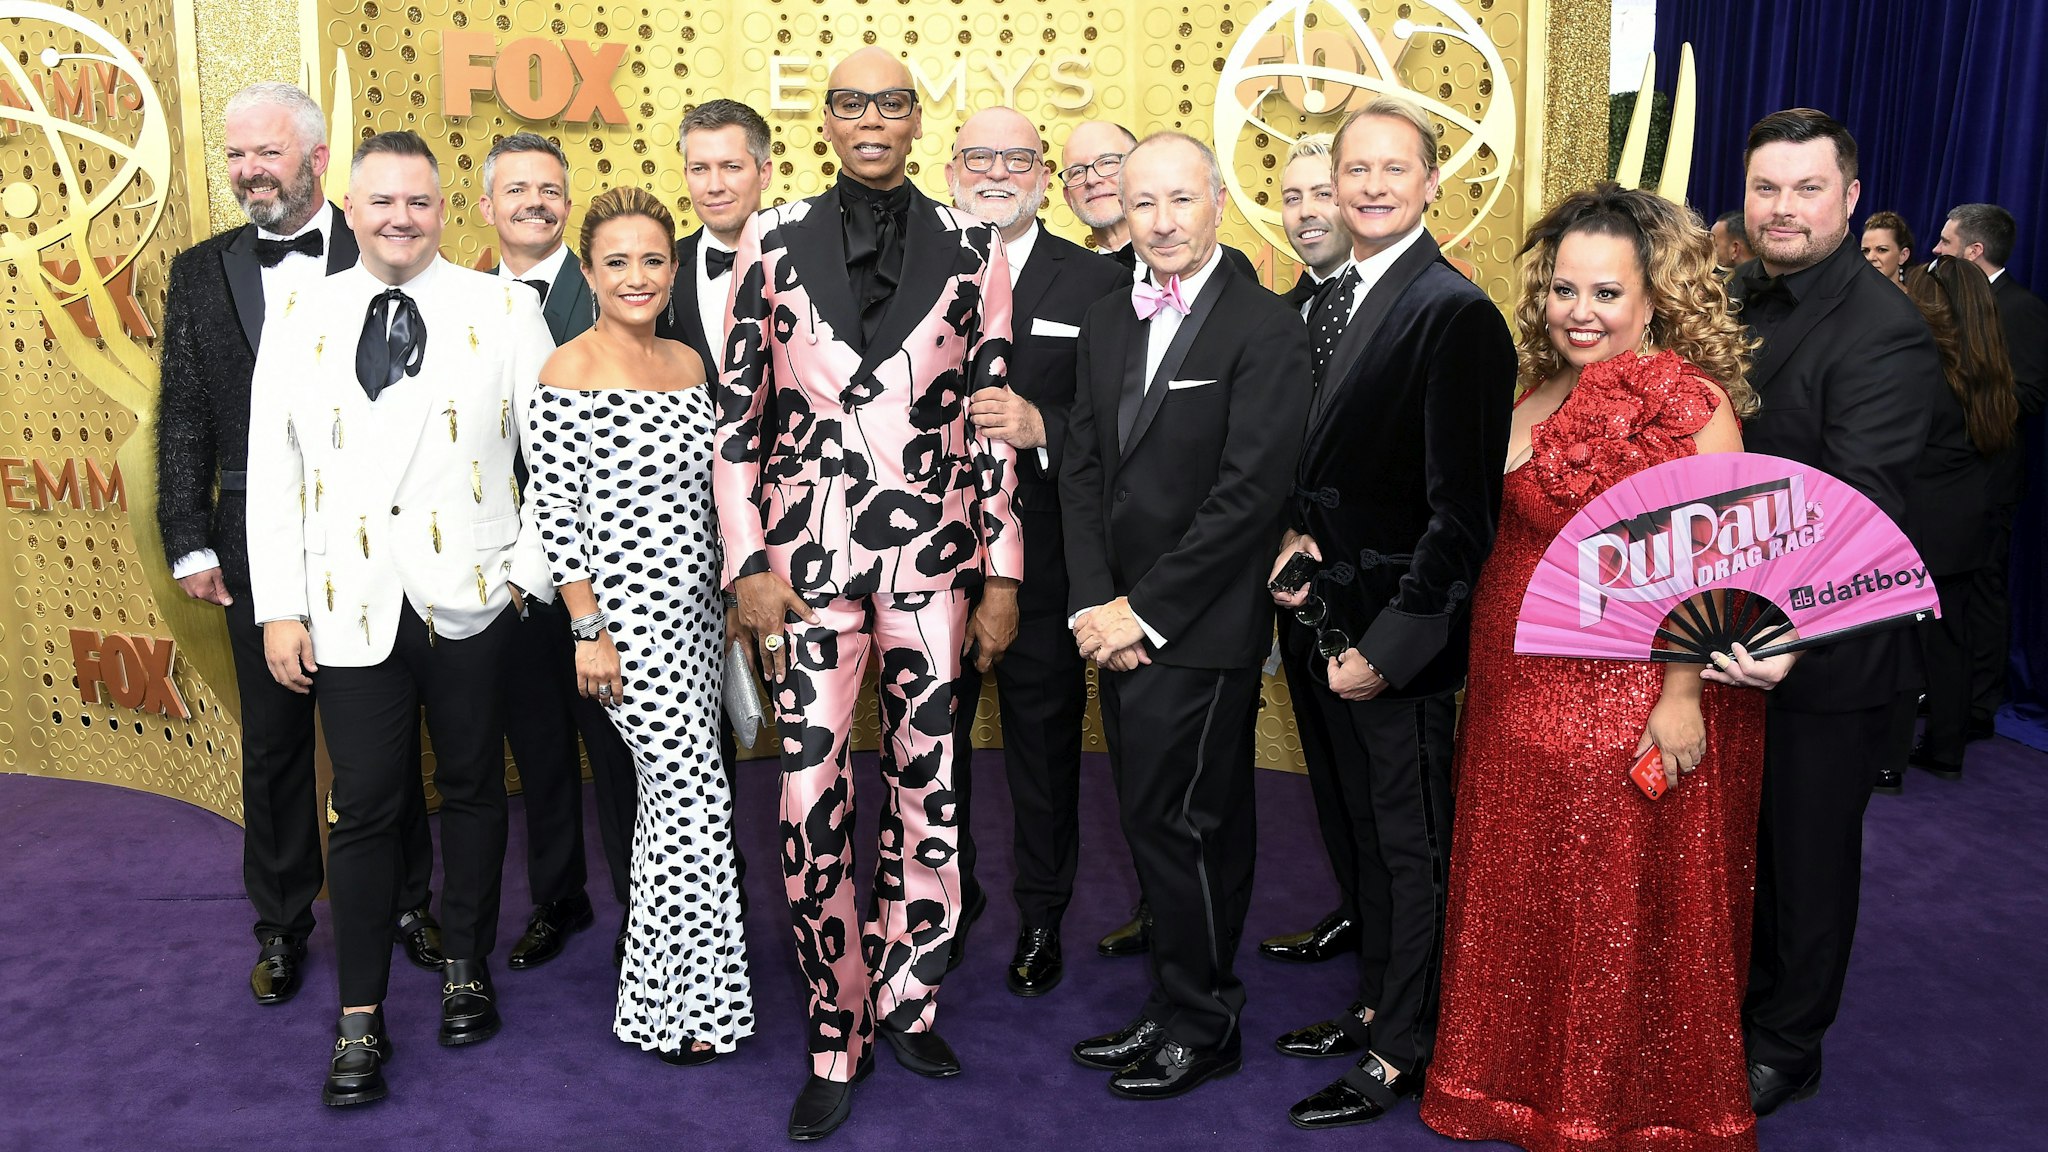 RuPaul with friends